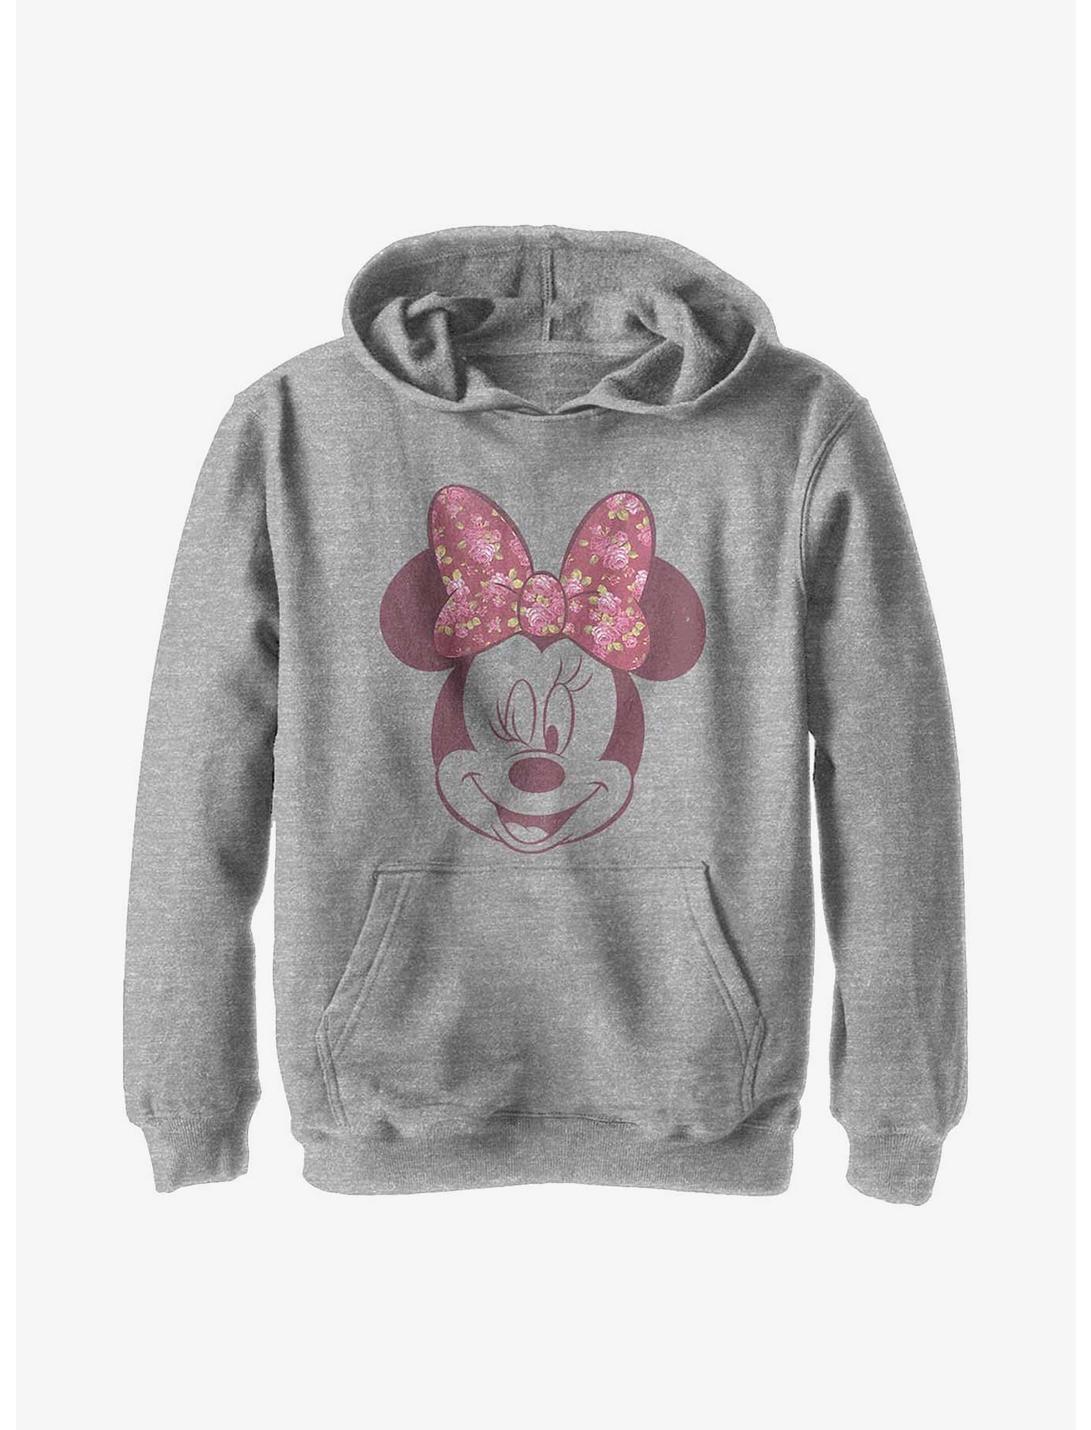 Disney Minnie Mouse Love Rose Youth Hoodie, ATH HTR, hi-res